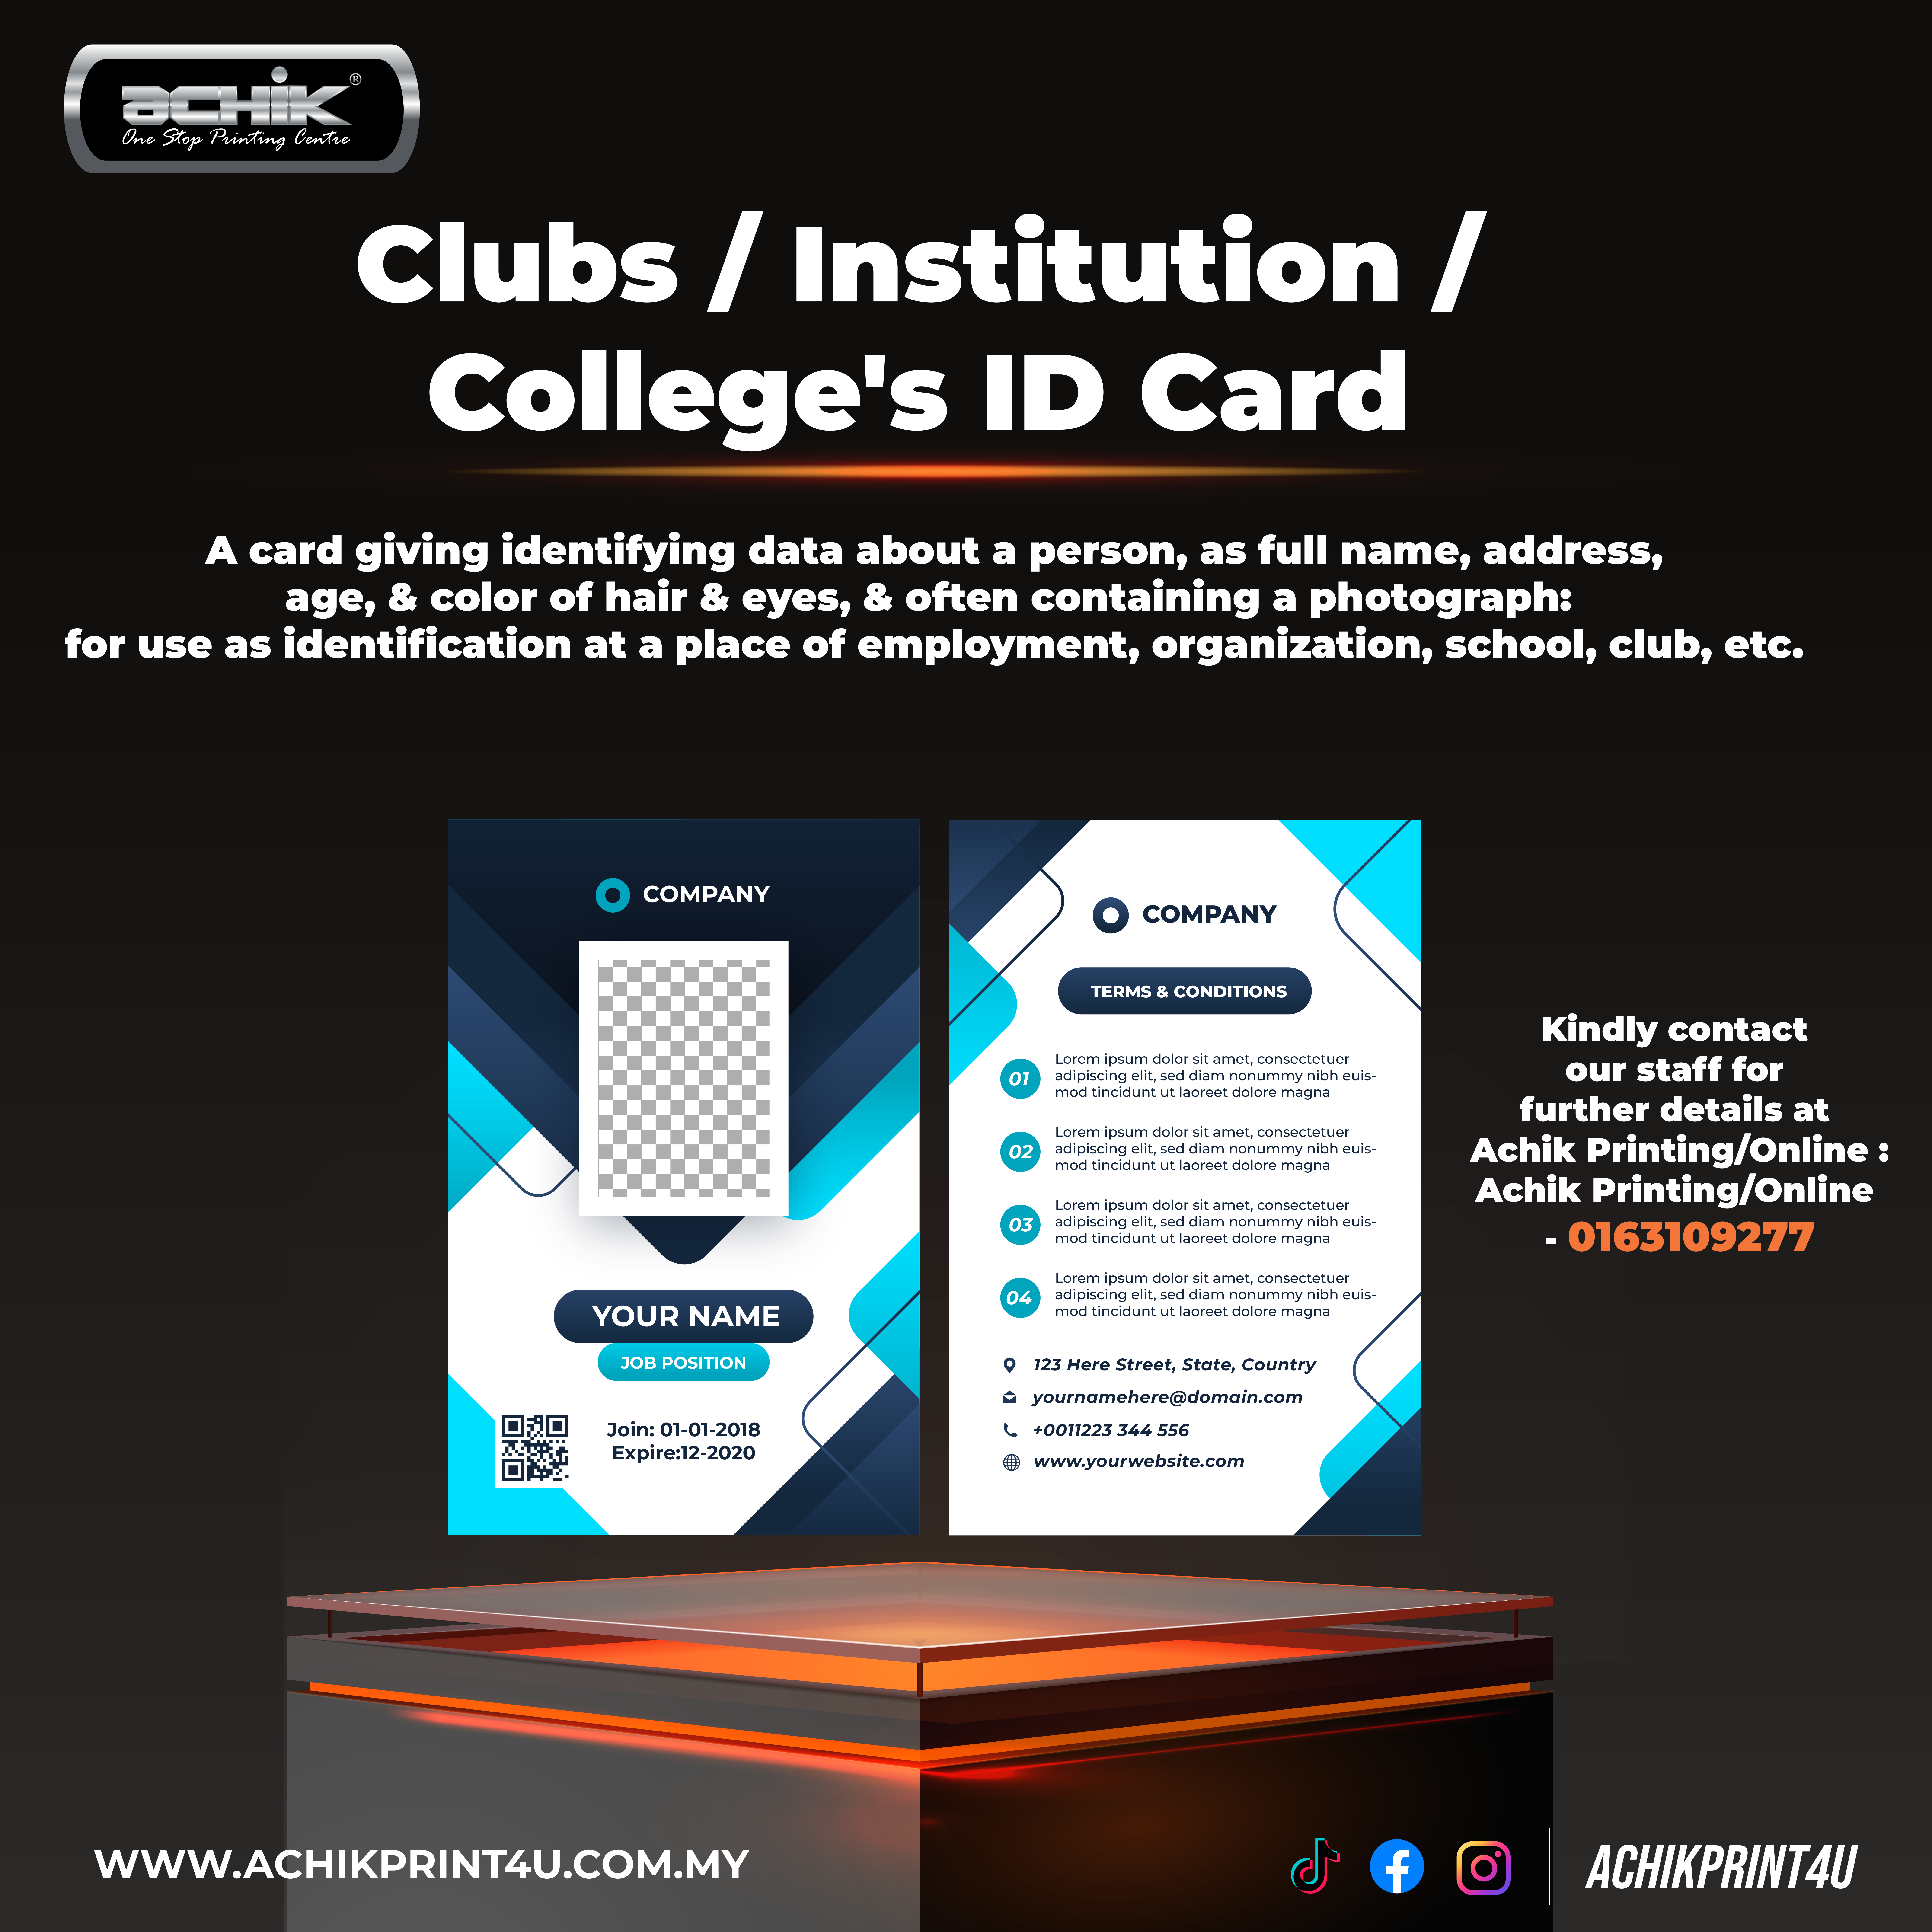 Clubs / Institution / College's ID Card